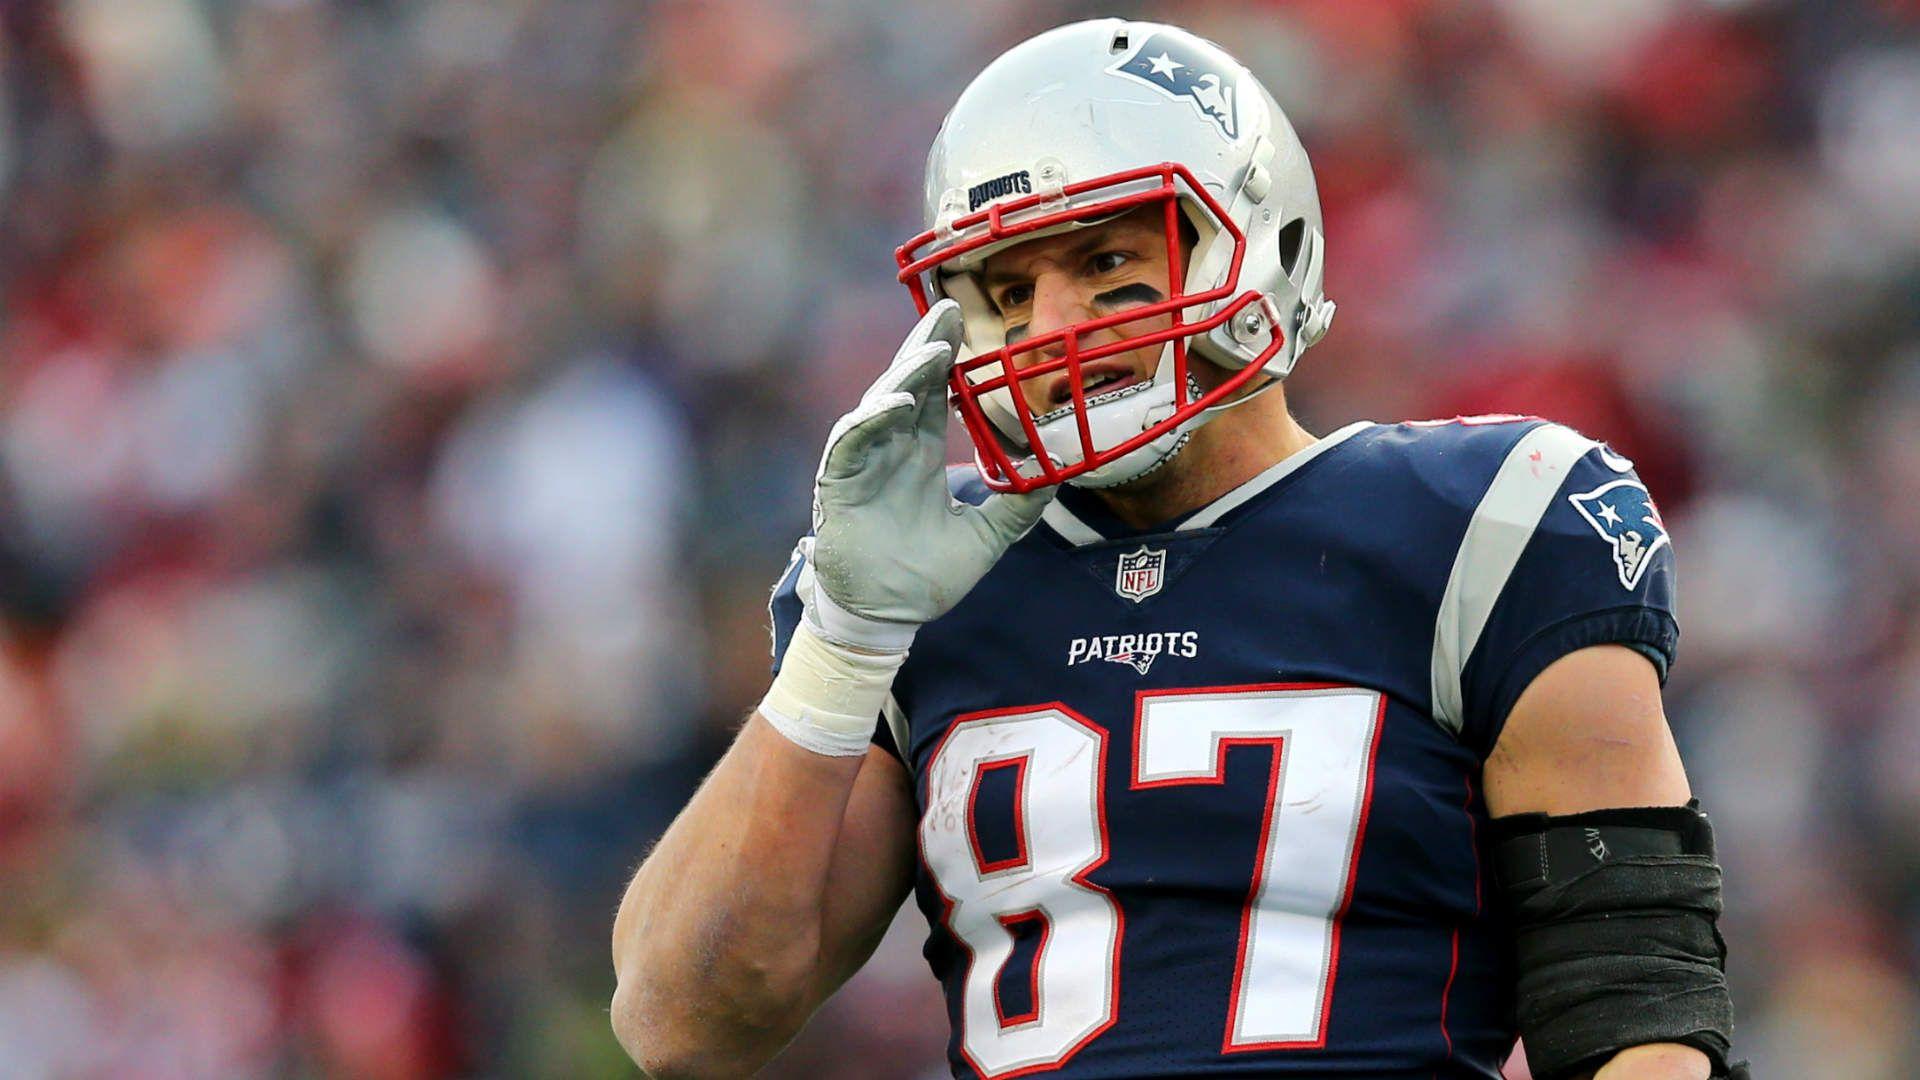 Patriots star Rob Gronkowski excited to be healthy, ready